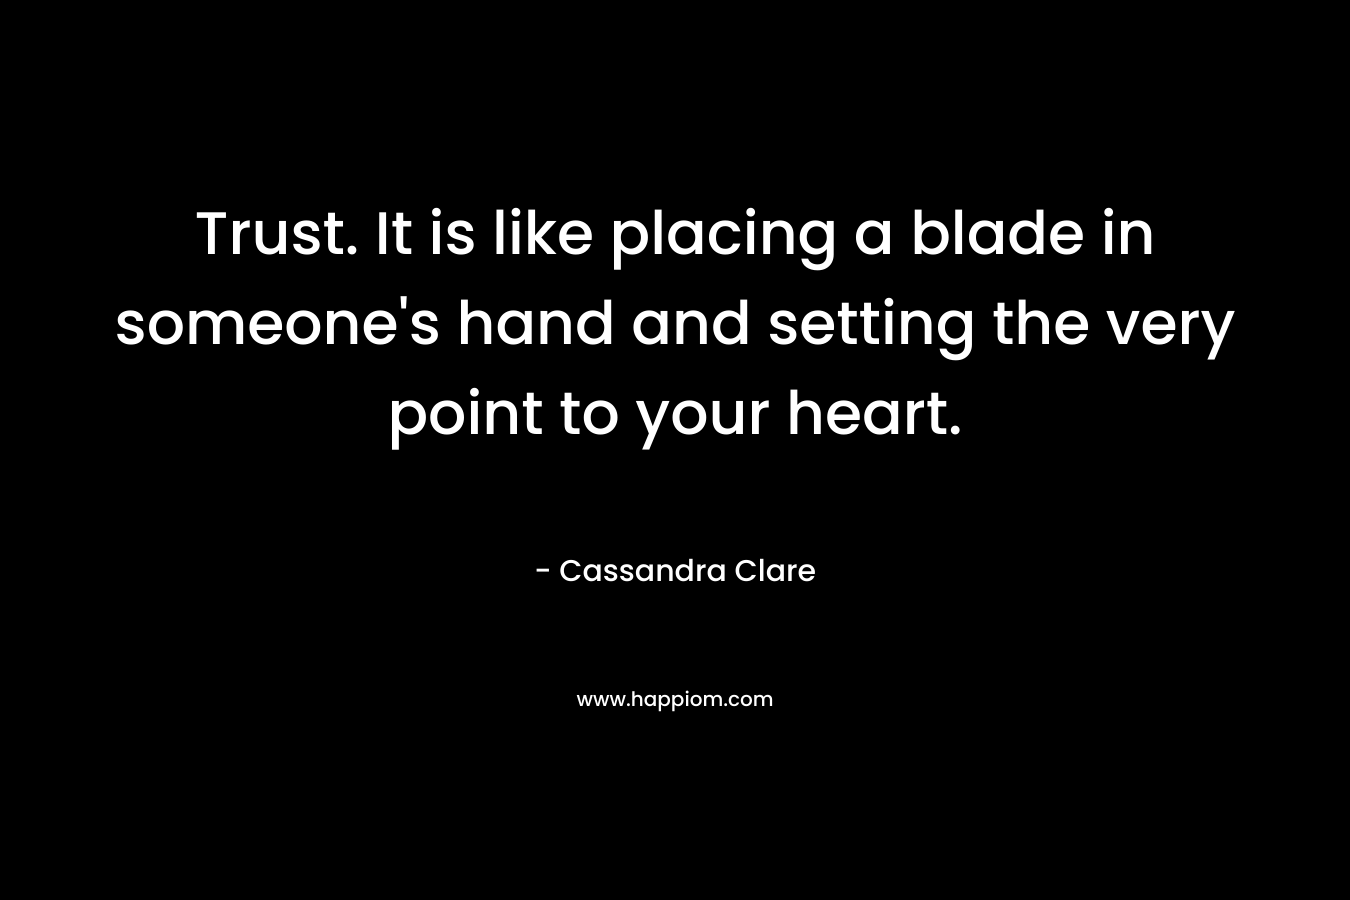 Trust. It is like placing a blade in someone's hand and setting the very point to your heart.